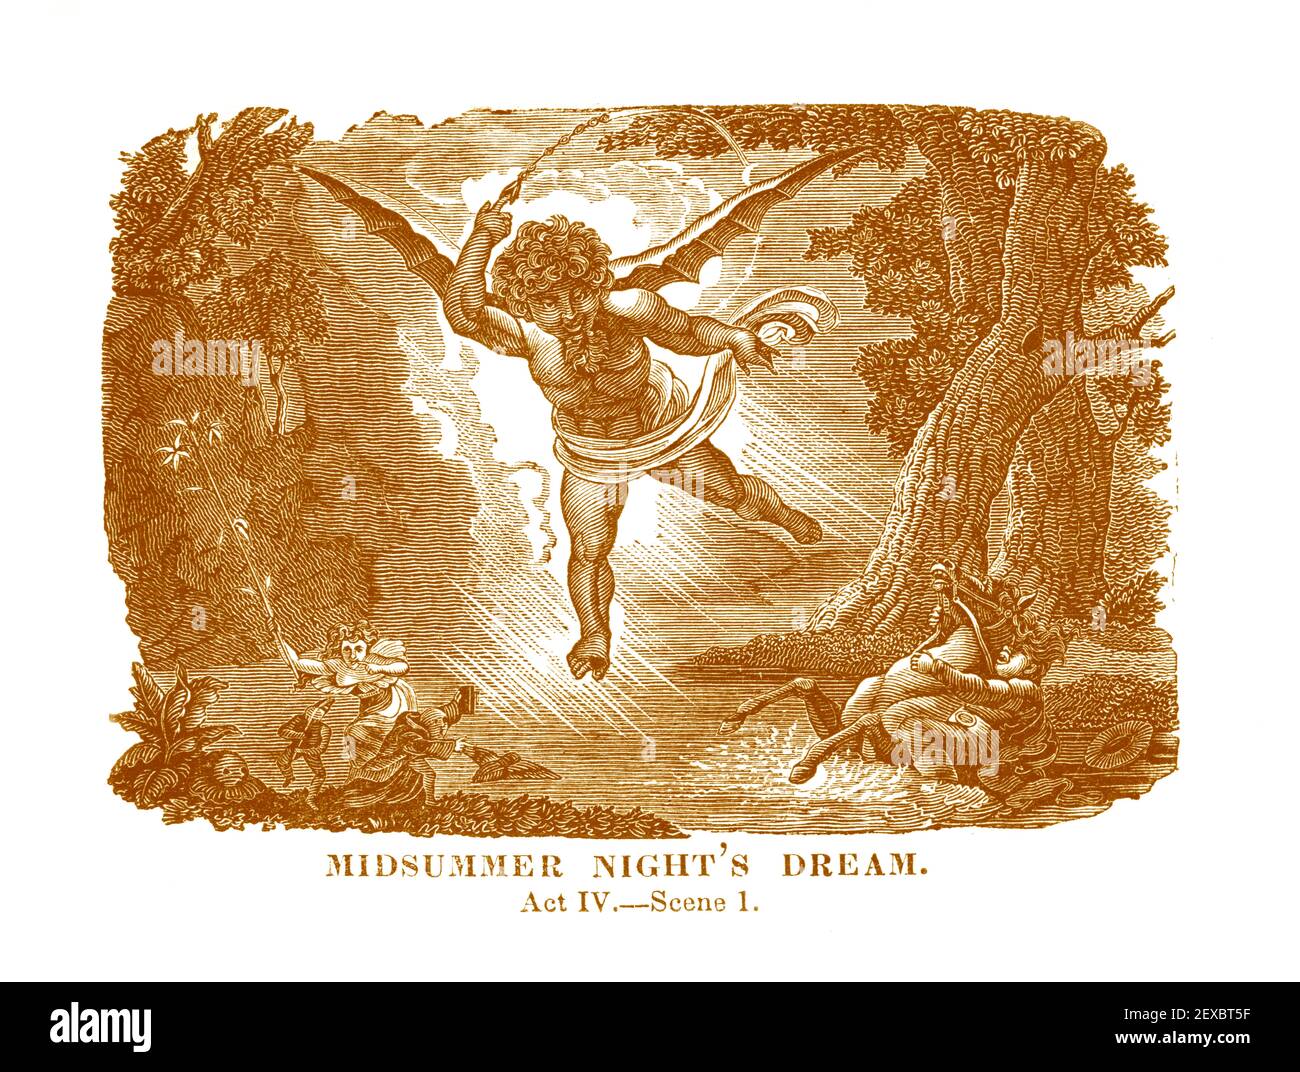 An 1834 engraving depicting a scene (Act IV Scene 1) from William Shakespeare's play, 'Midsummer Night's Dream', digitally colorized. Stock Photo